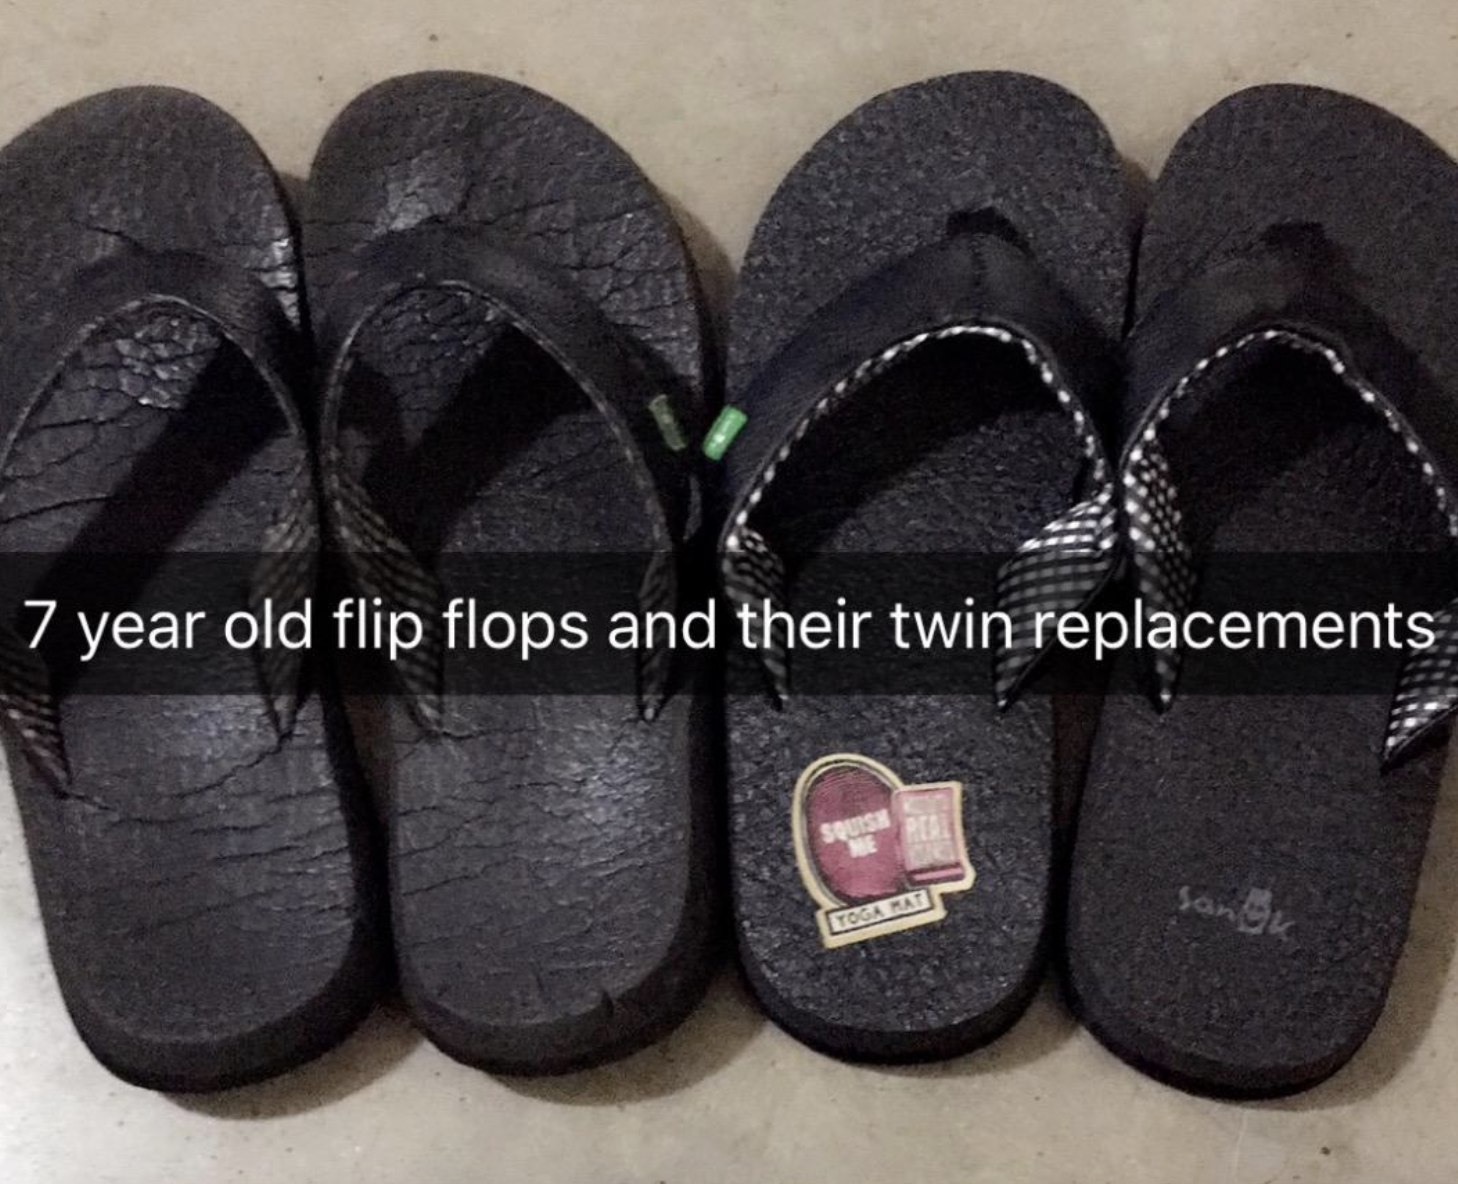 an old pair of Sanuk flip flops next to a new pair labeled &quot;7 year old flip flops and their twin replacements&quot;